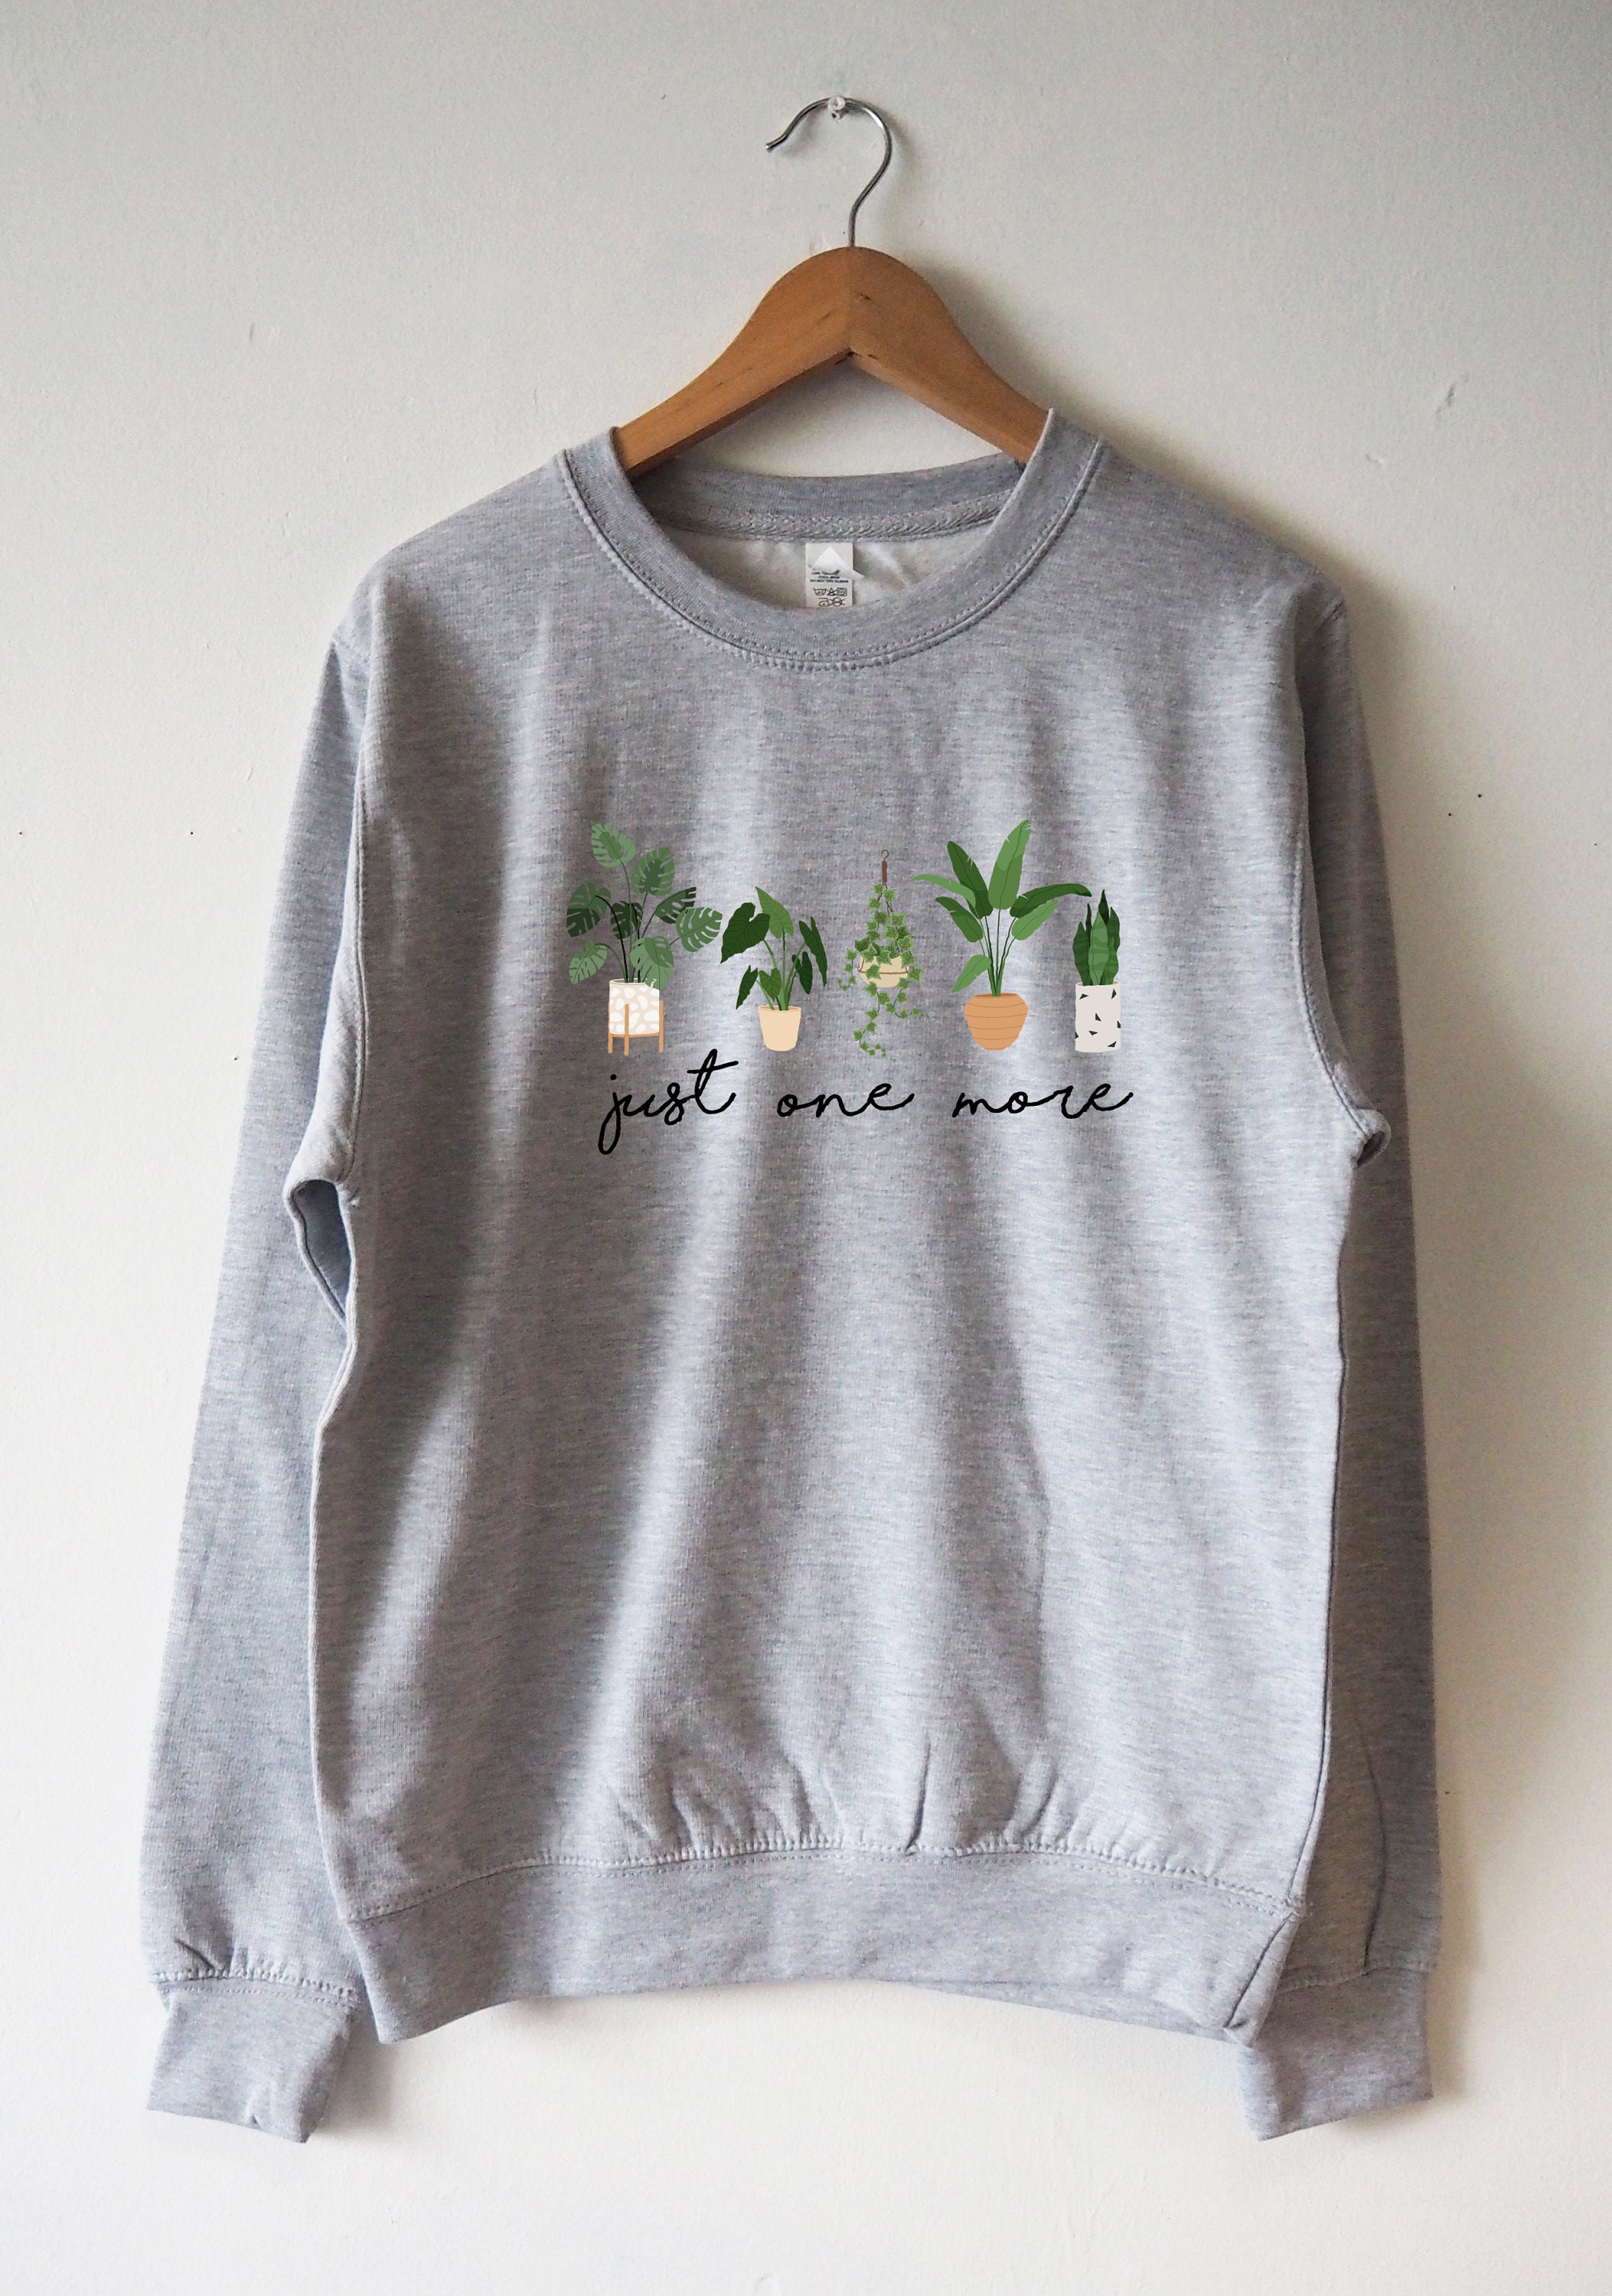 Discover Just One More Plant Sweatshirt